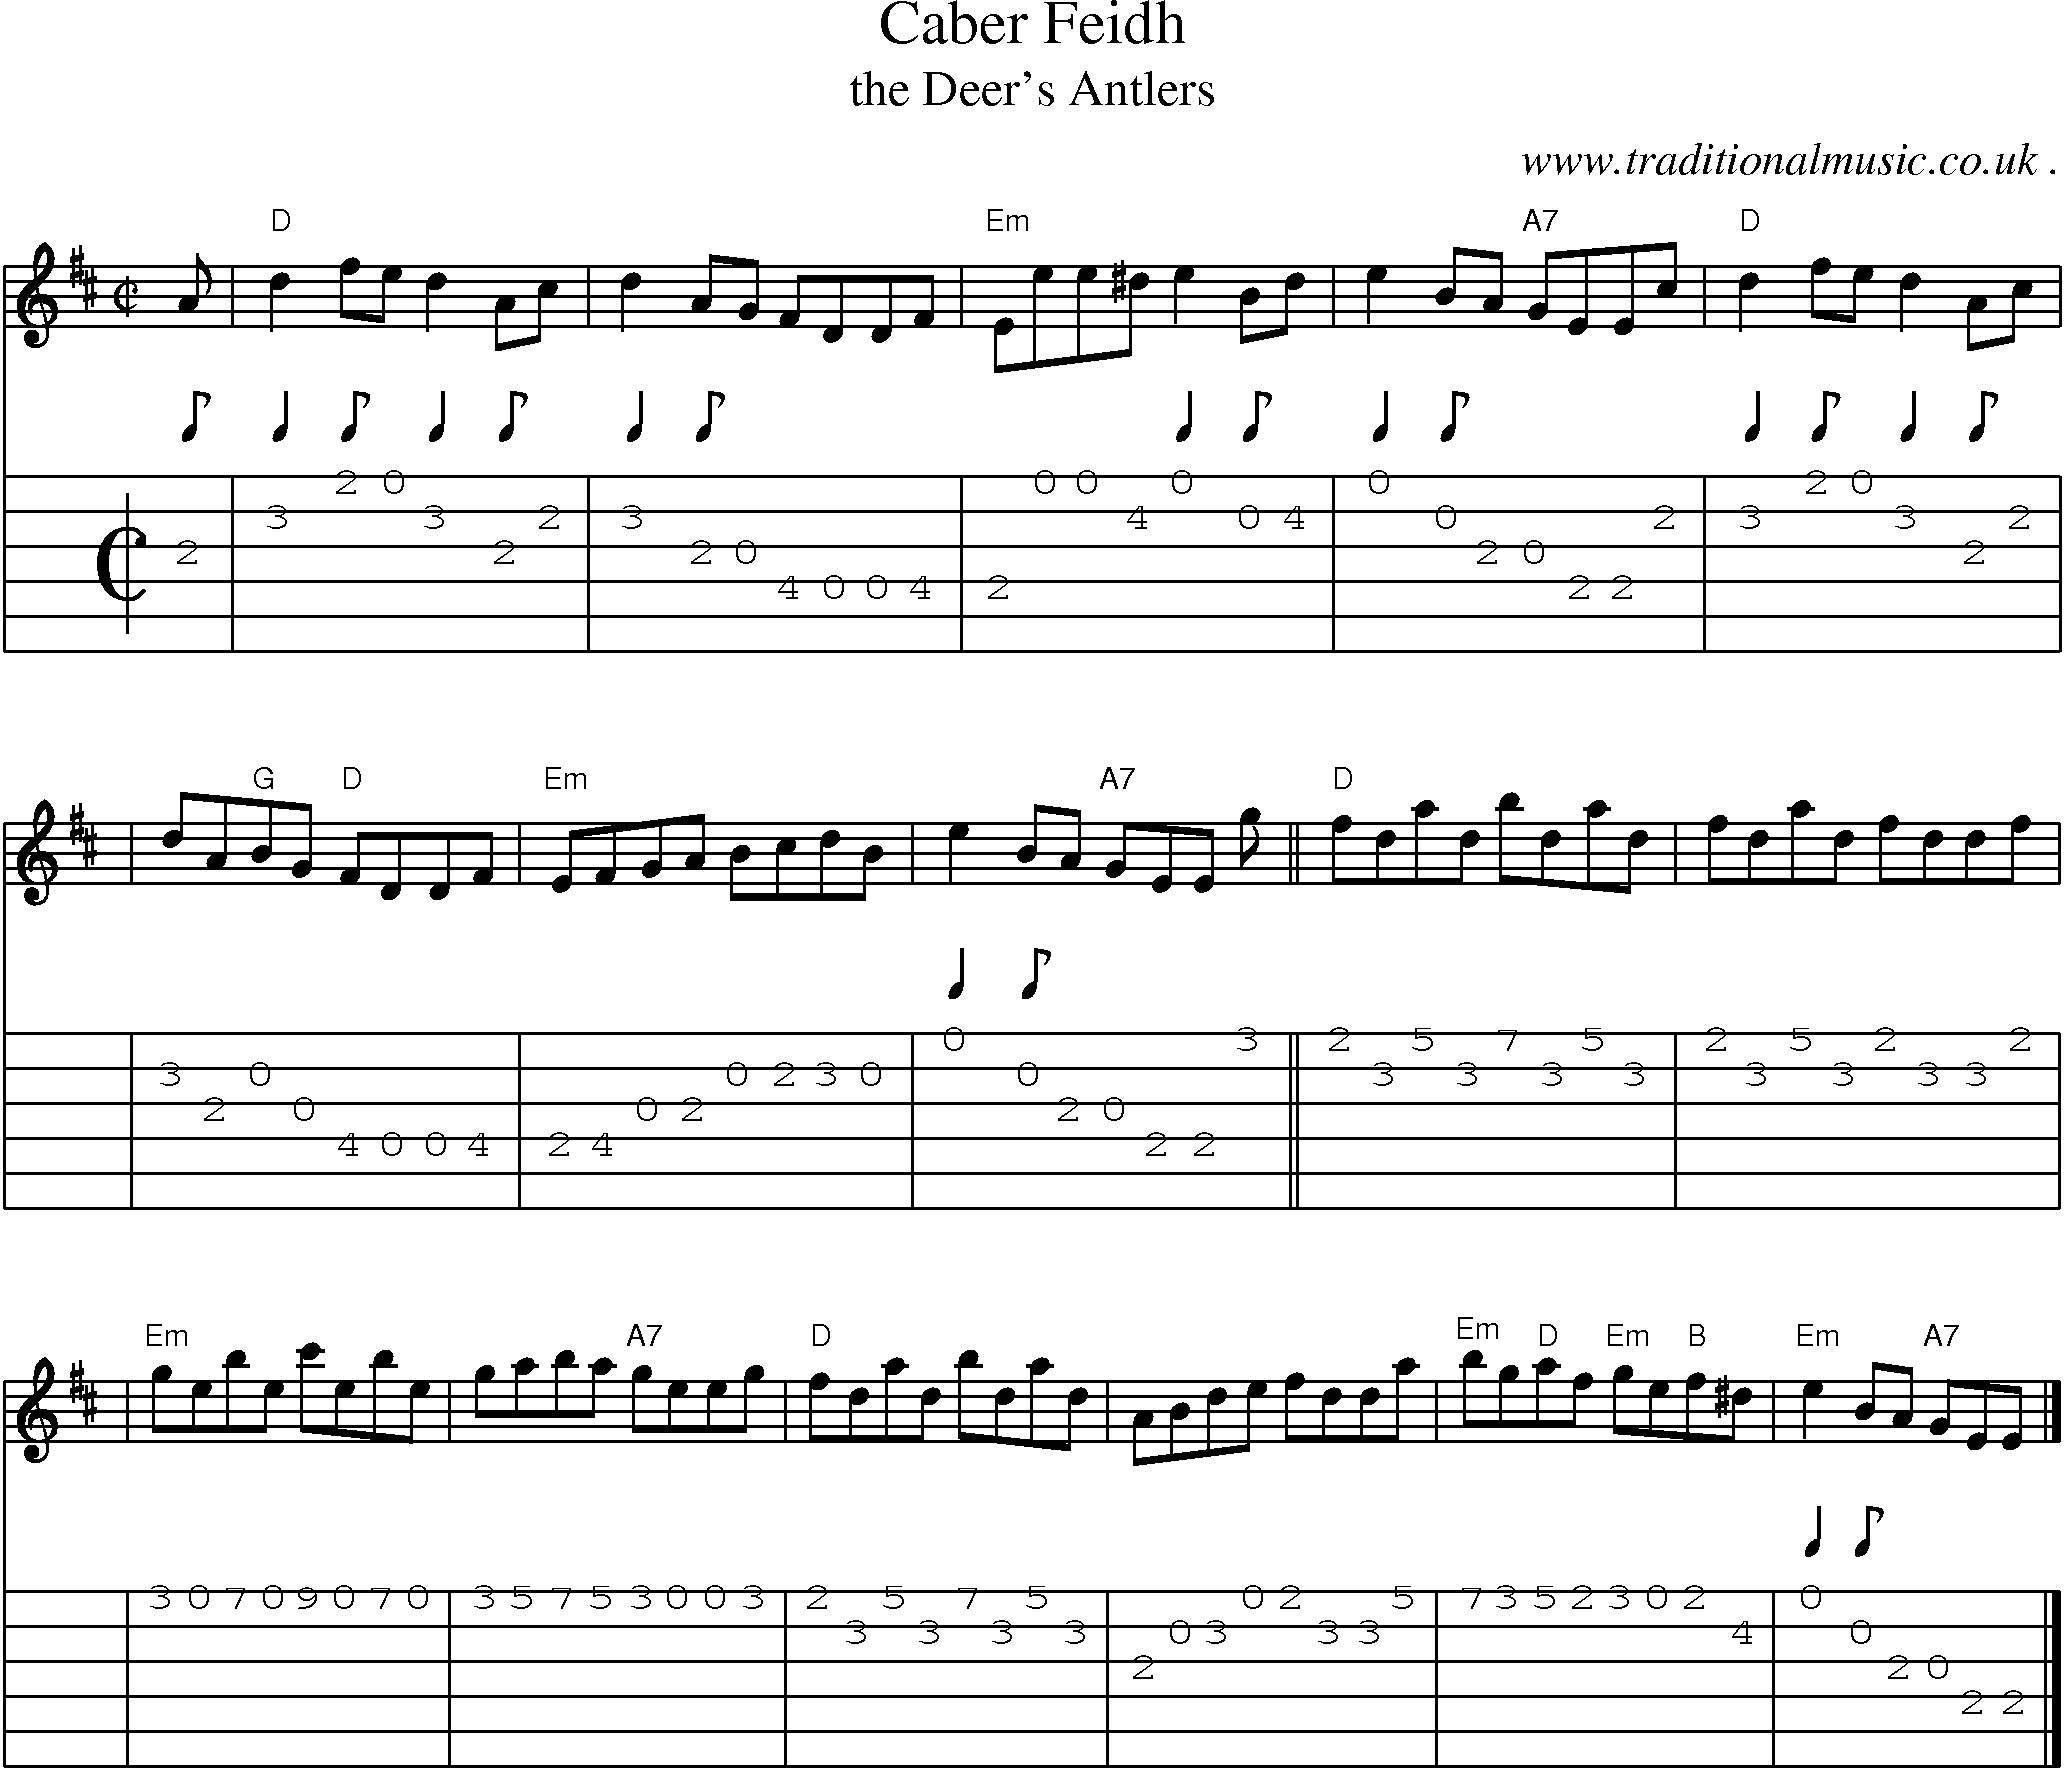 Sheet-music  score, Chords and Guitar Tabs for Caber Feidh